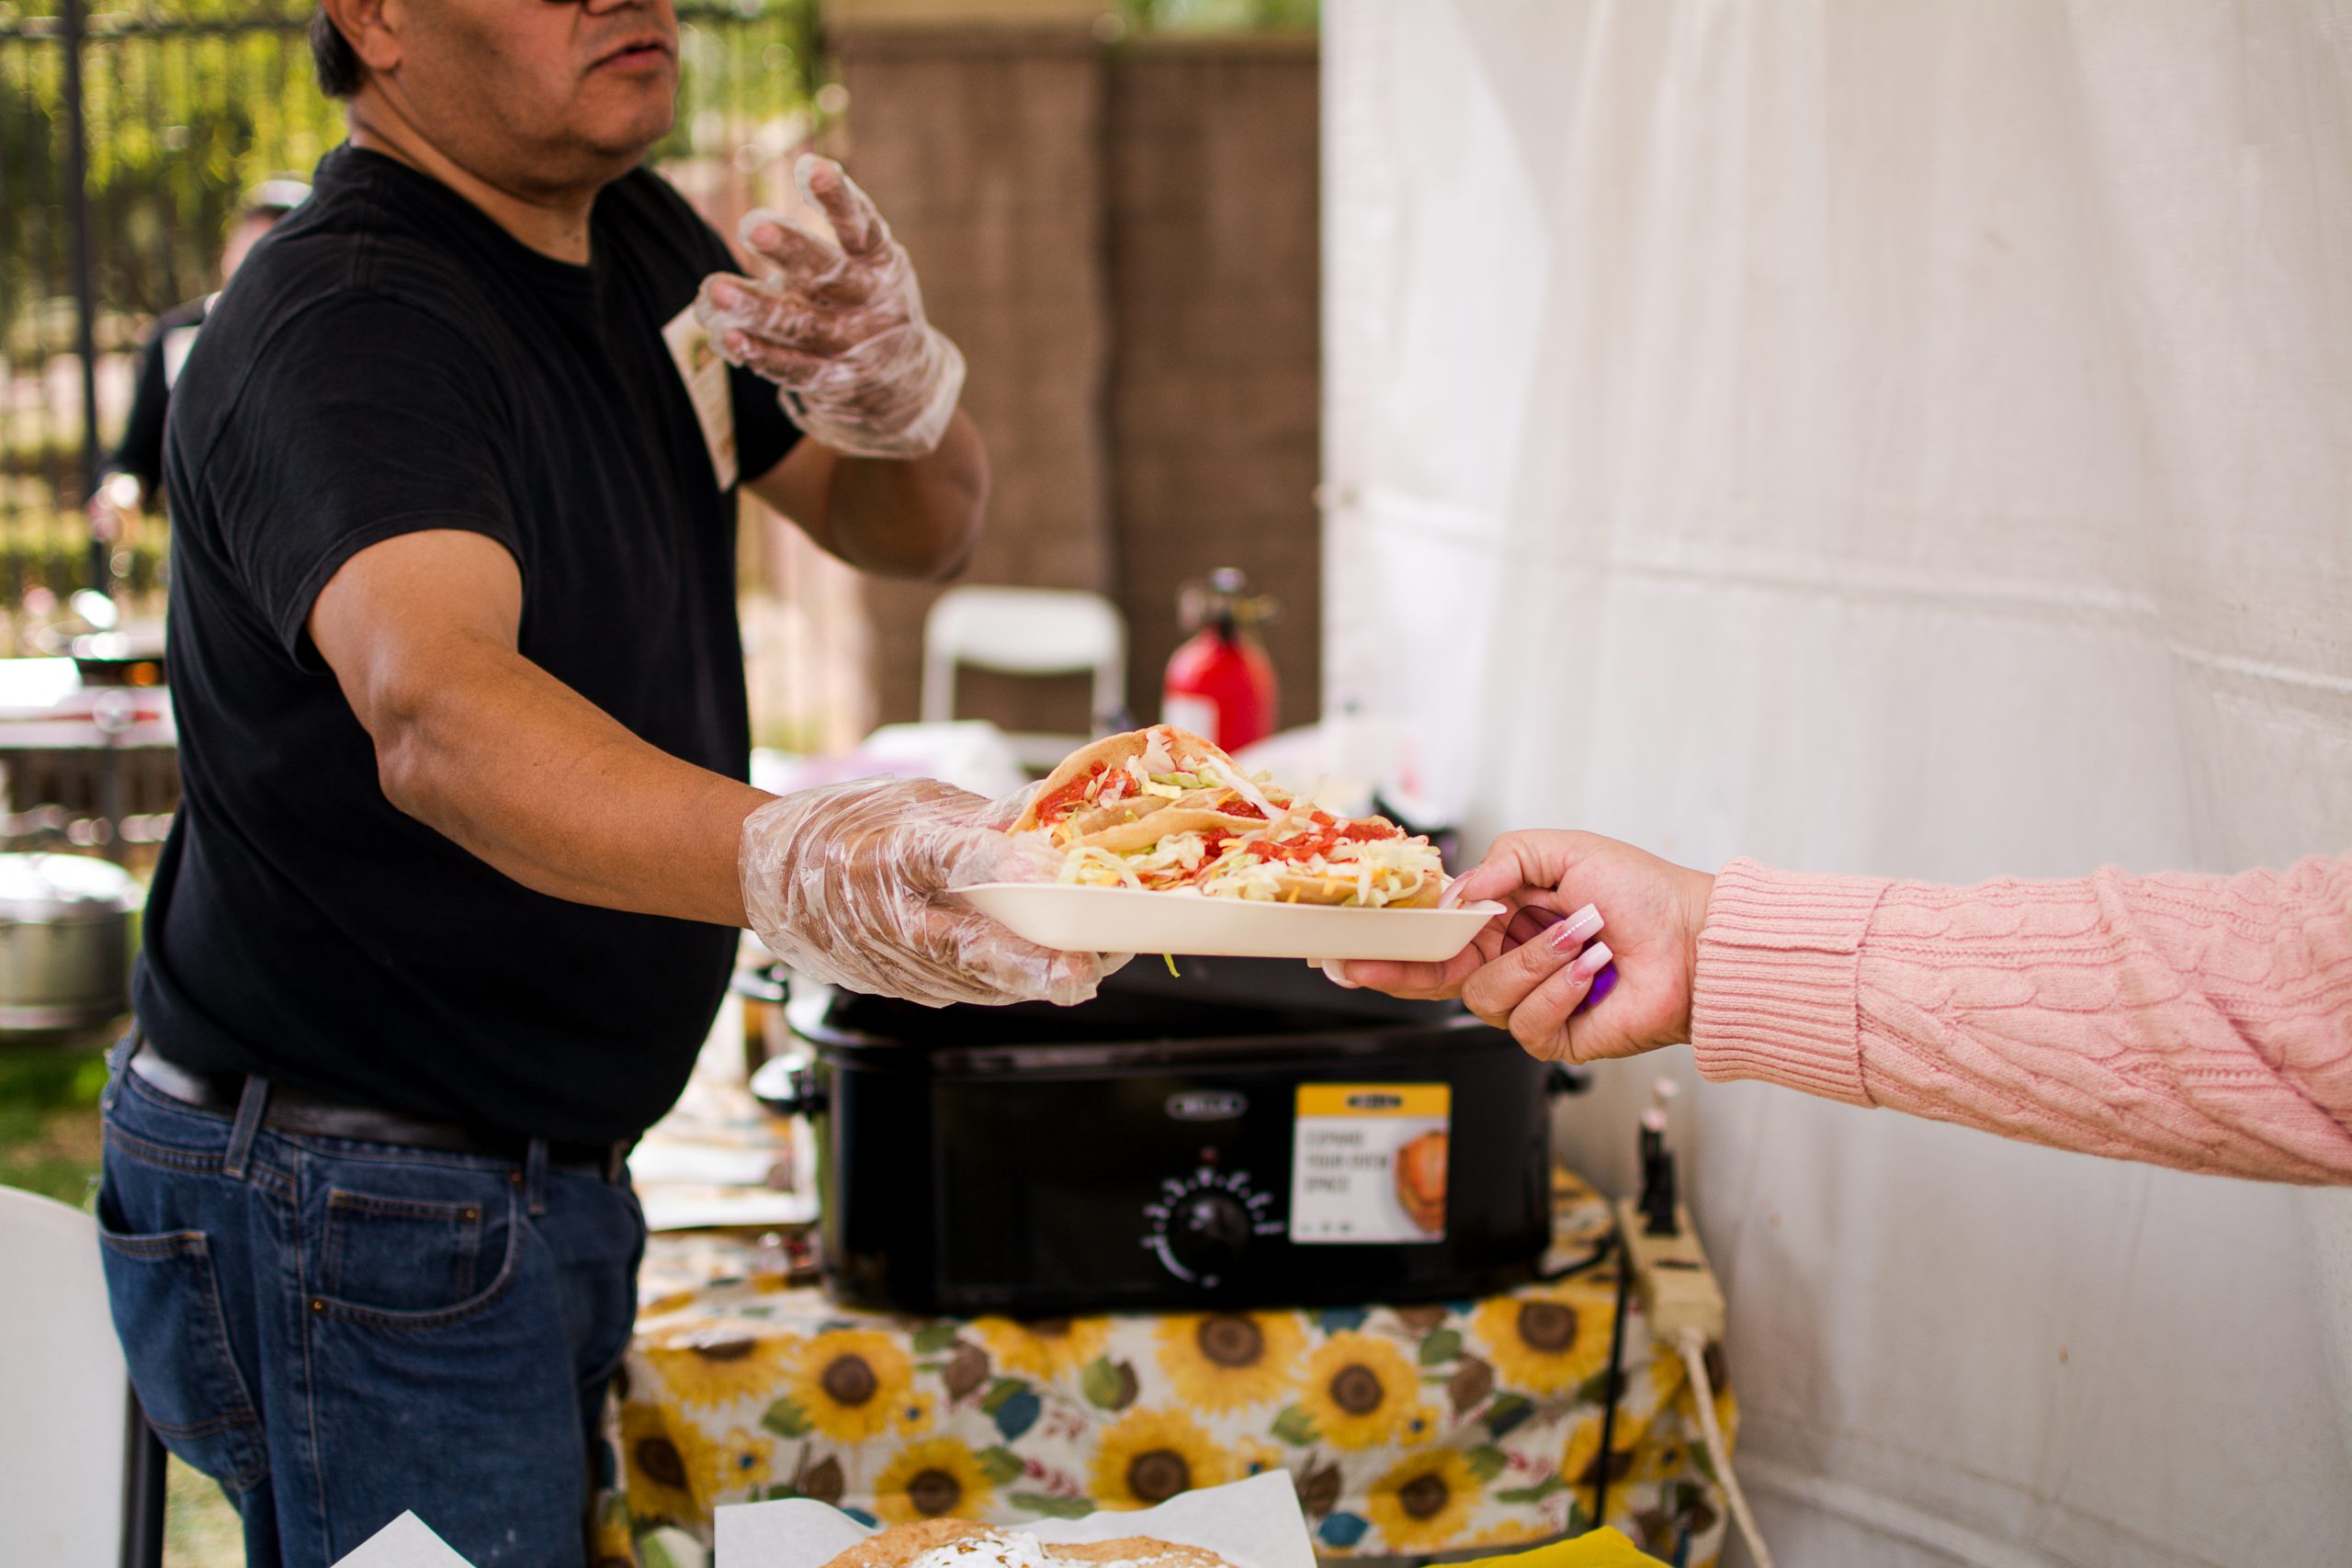 Photo courtesy of Sandoval Creative for Tucson Tamal and Heritage Festival